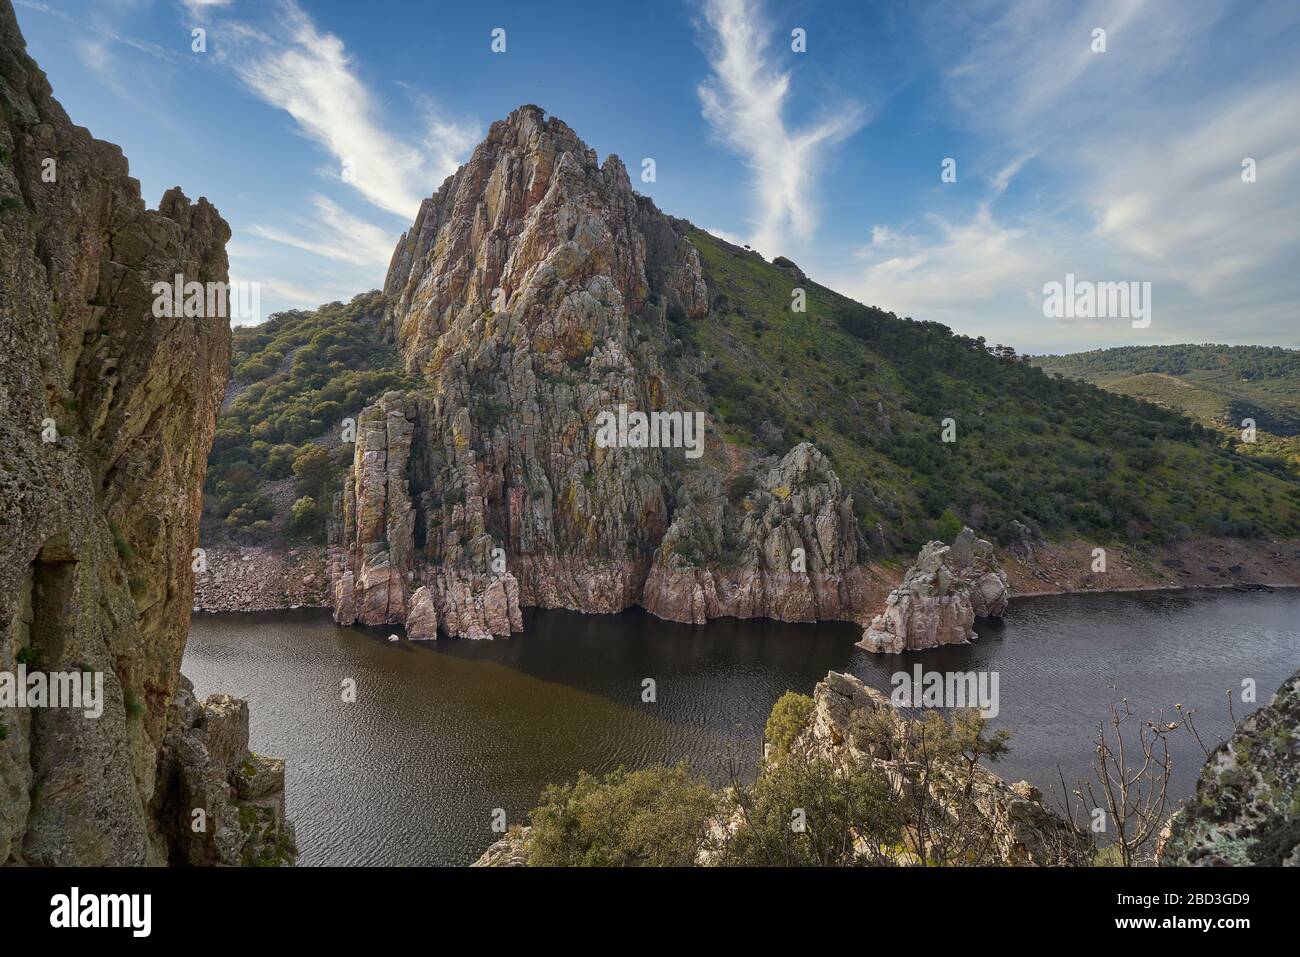 Gypsy jump, Monfrague National Park, a beautiful place ideal for birdwatching in central Spain. It is located in the Extremadura region of Spain. Stock Photo